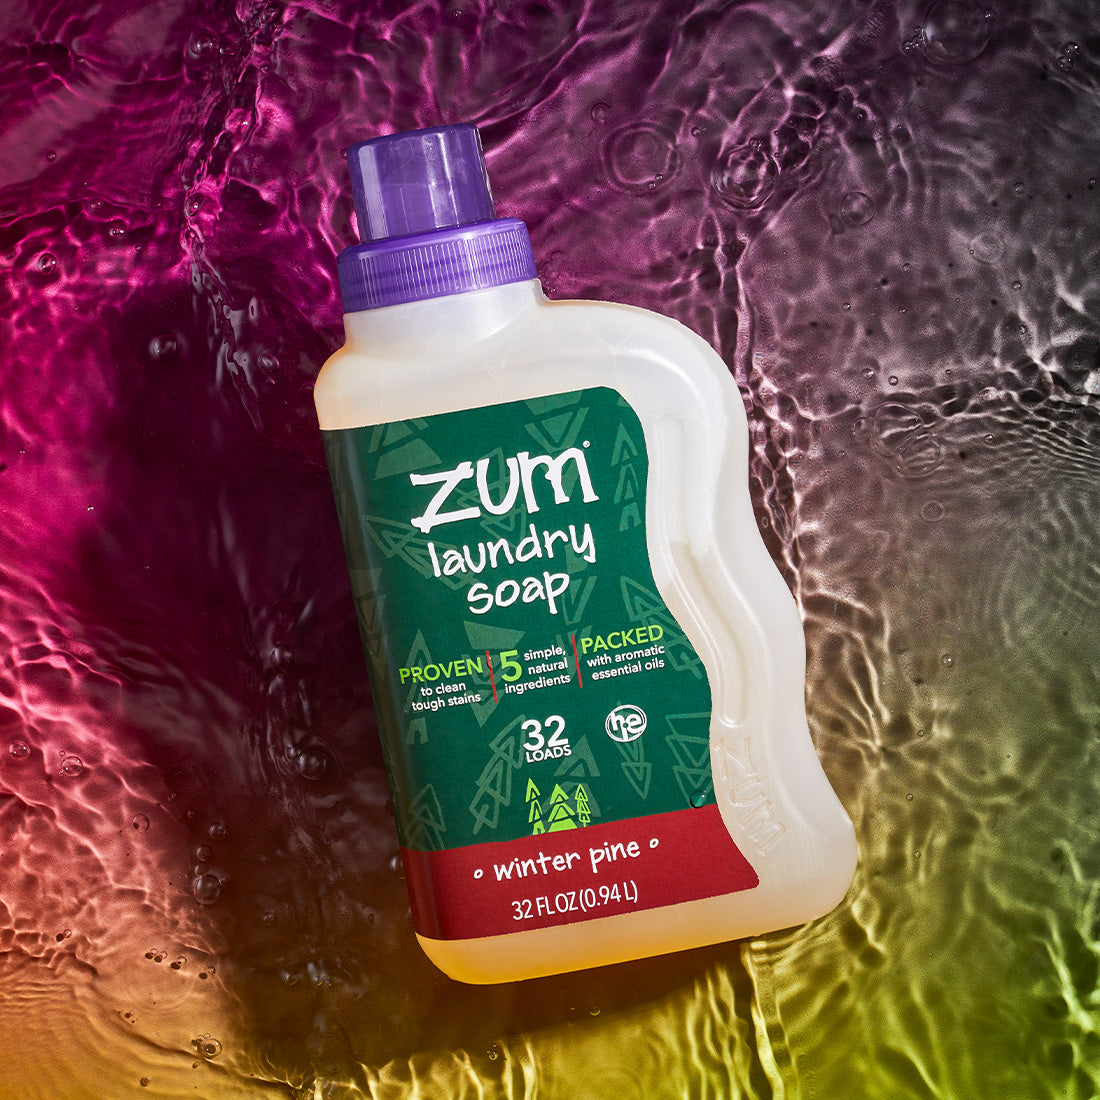 Winter Pine scented 32 fl. oz. bottle of laundry soap laying on a watered surface with a pinkish red to green gradient background.